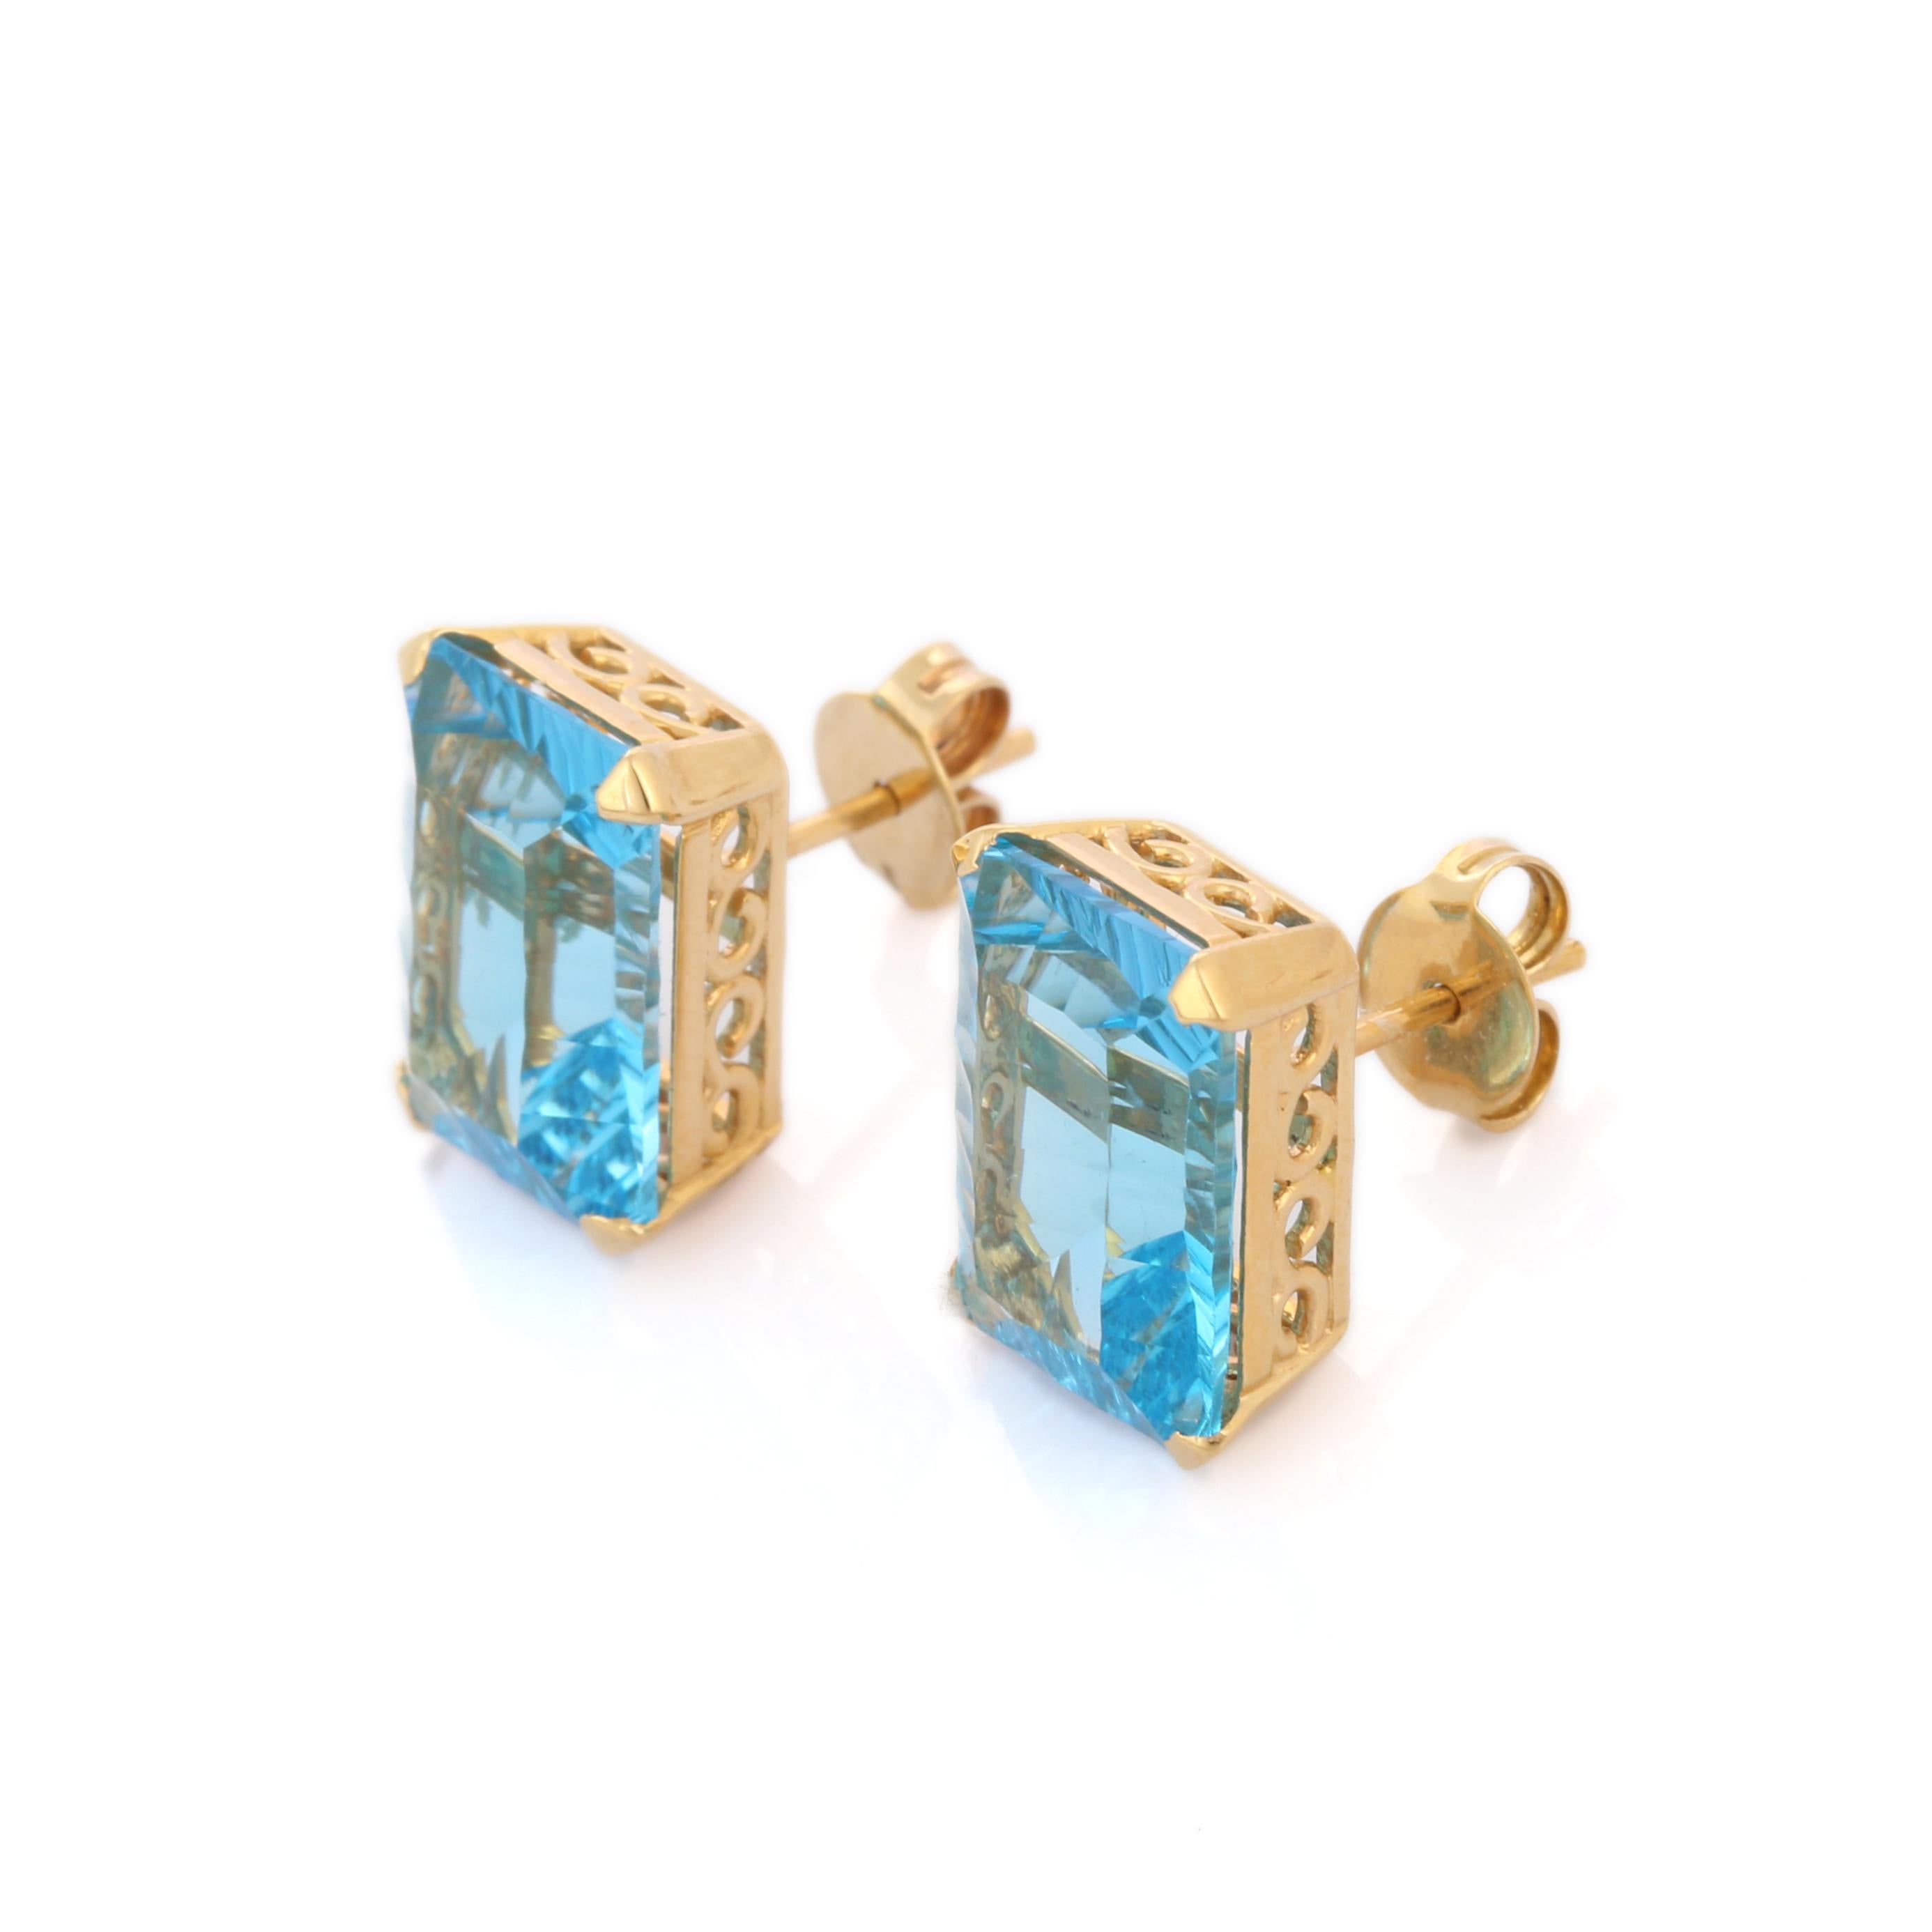 Earrings create a subtle beauty while showcasing the colors of the natural precious gemstones and illuminating diamonds making a statement.

Octagon cut Blue Topaz Stud earrings in 18K gold. Embrace your look with these stunning pair of earrings